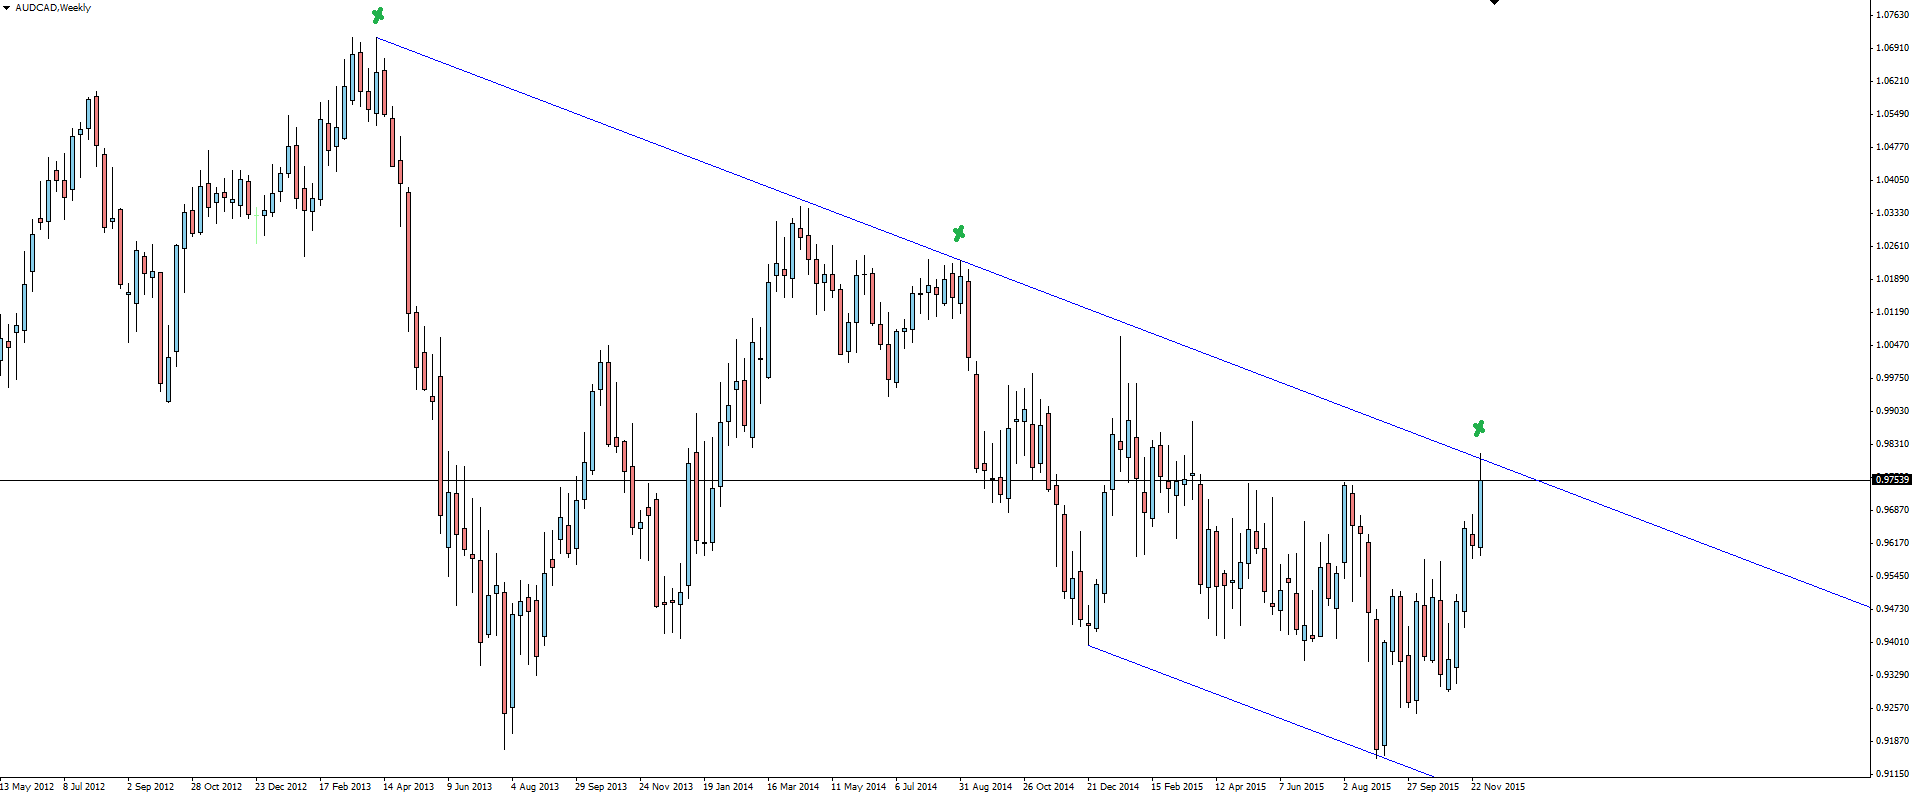 AUD/CAD Weekly Chart